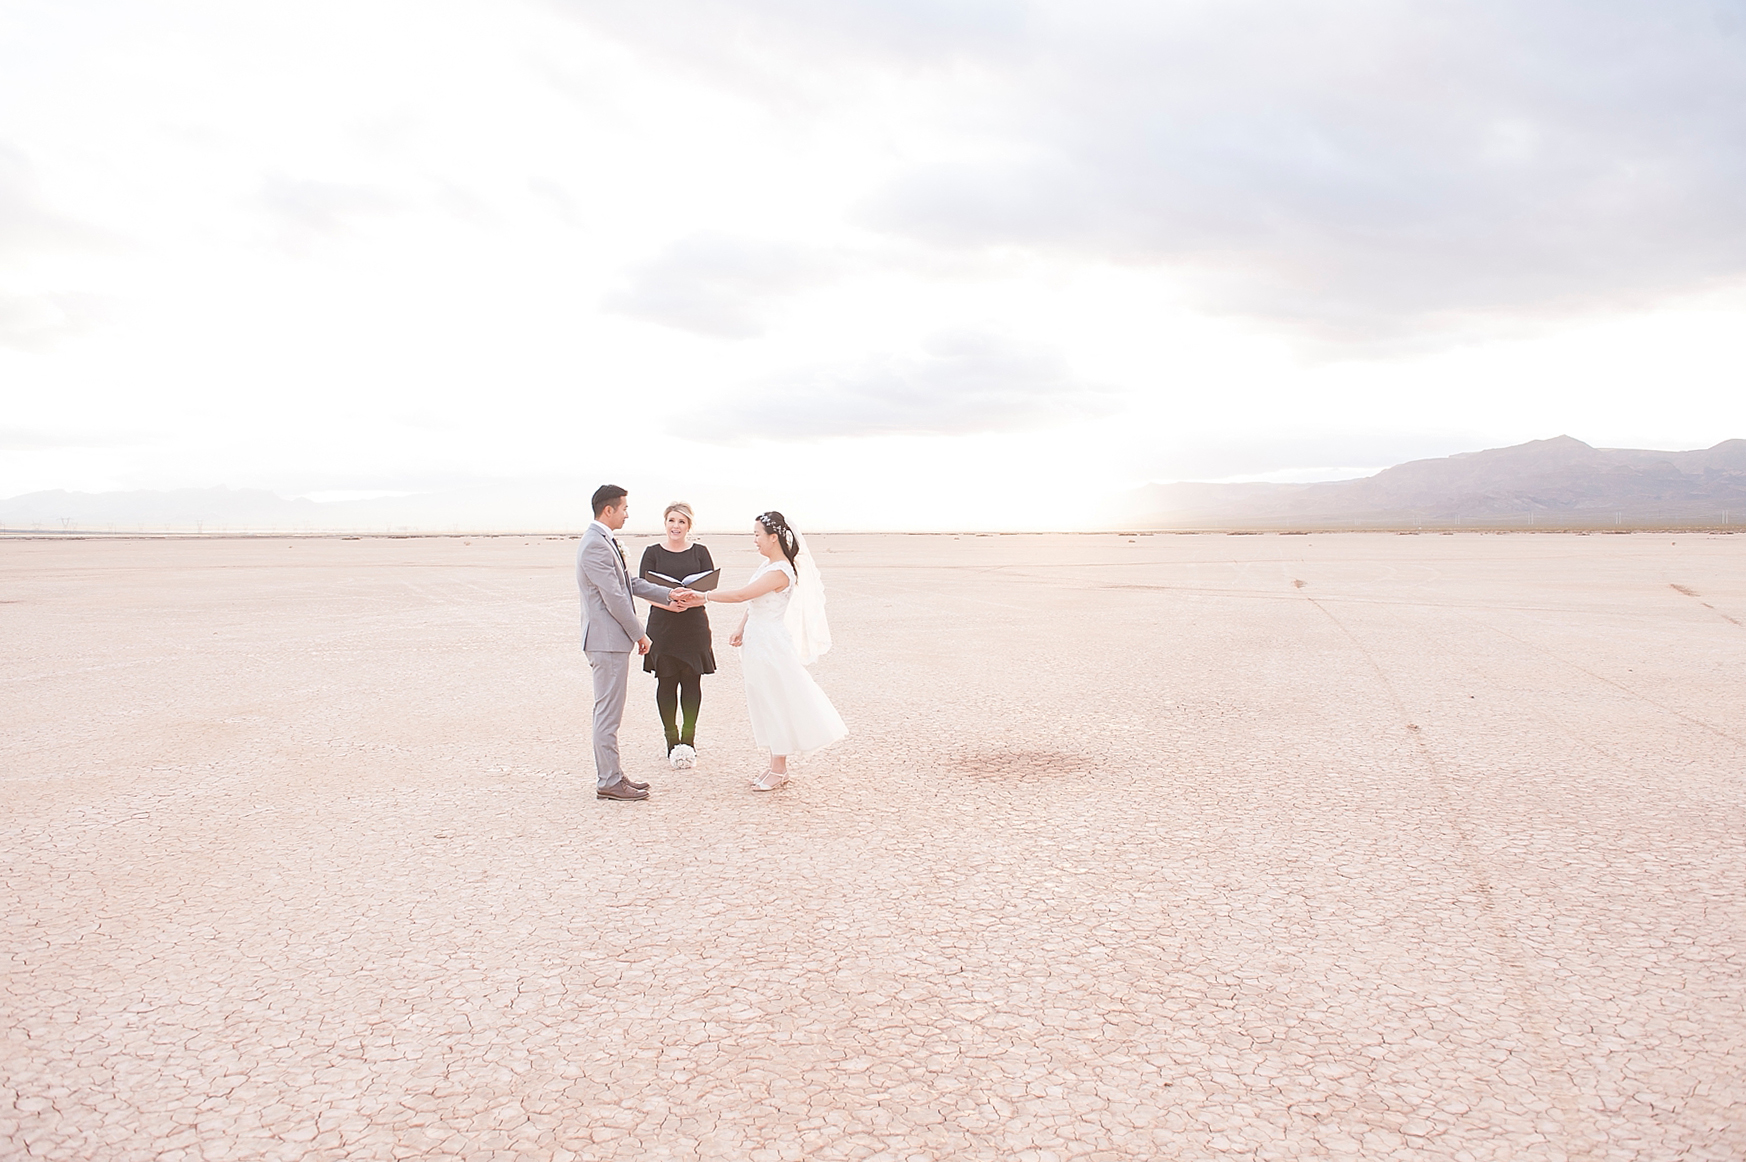 Location: Dry Lake Bed | Officiant: Peachy Keen Unions